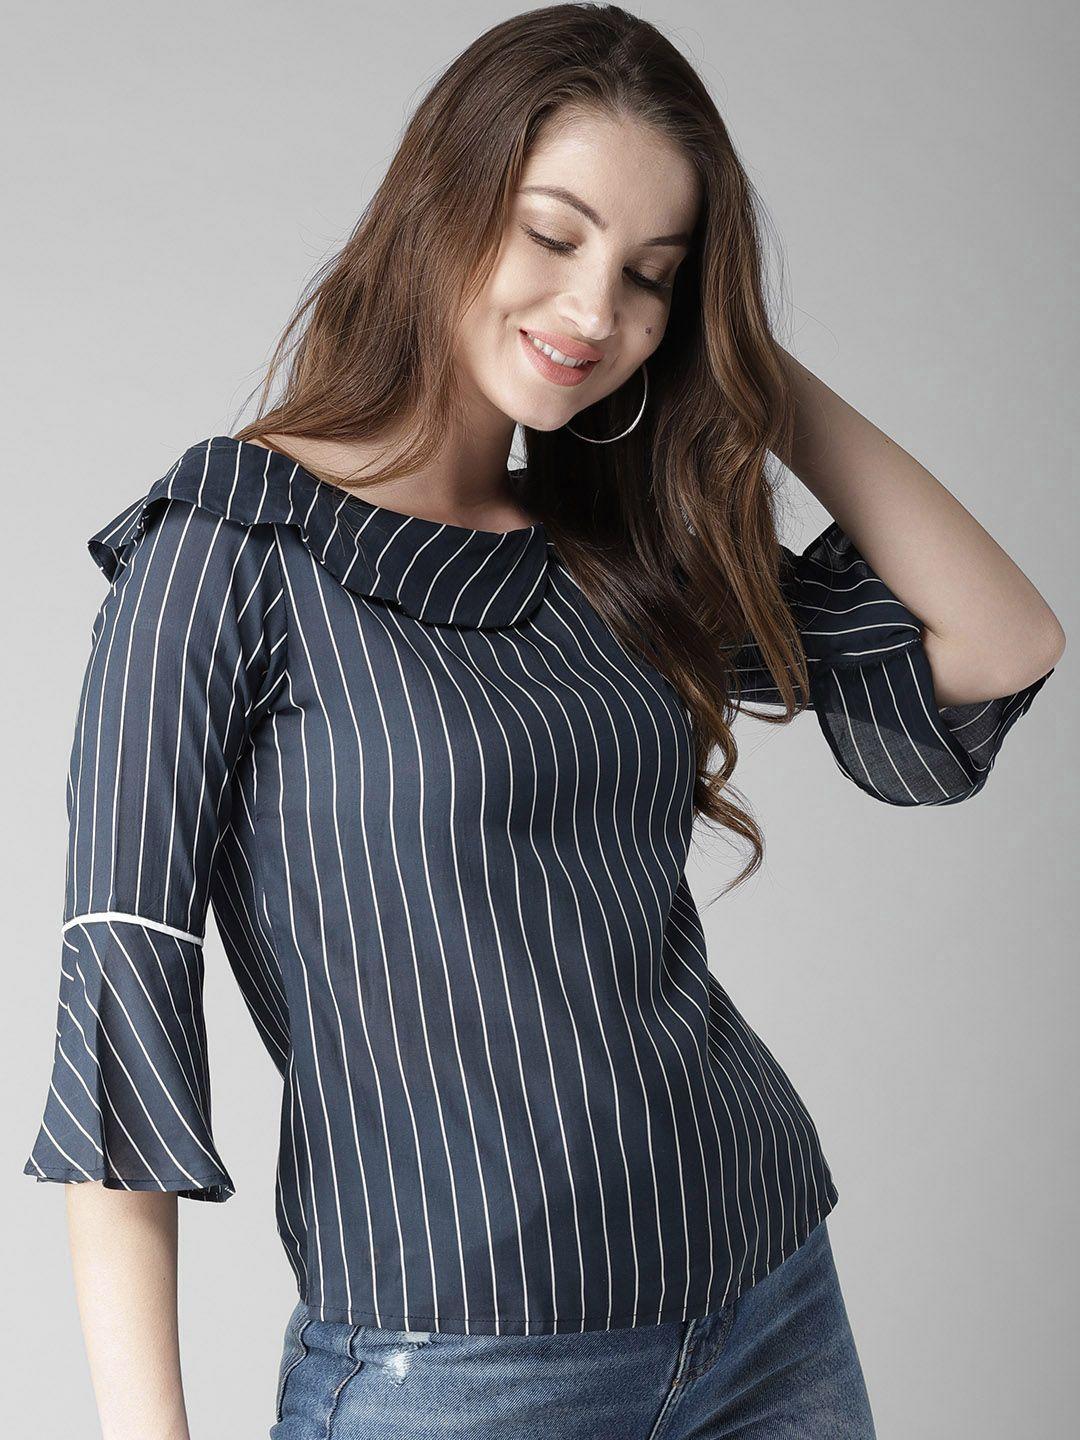 style-quotient-by-noi-women-navy-blue-&-white-striped-top